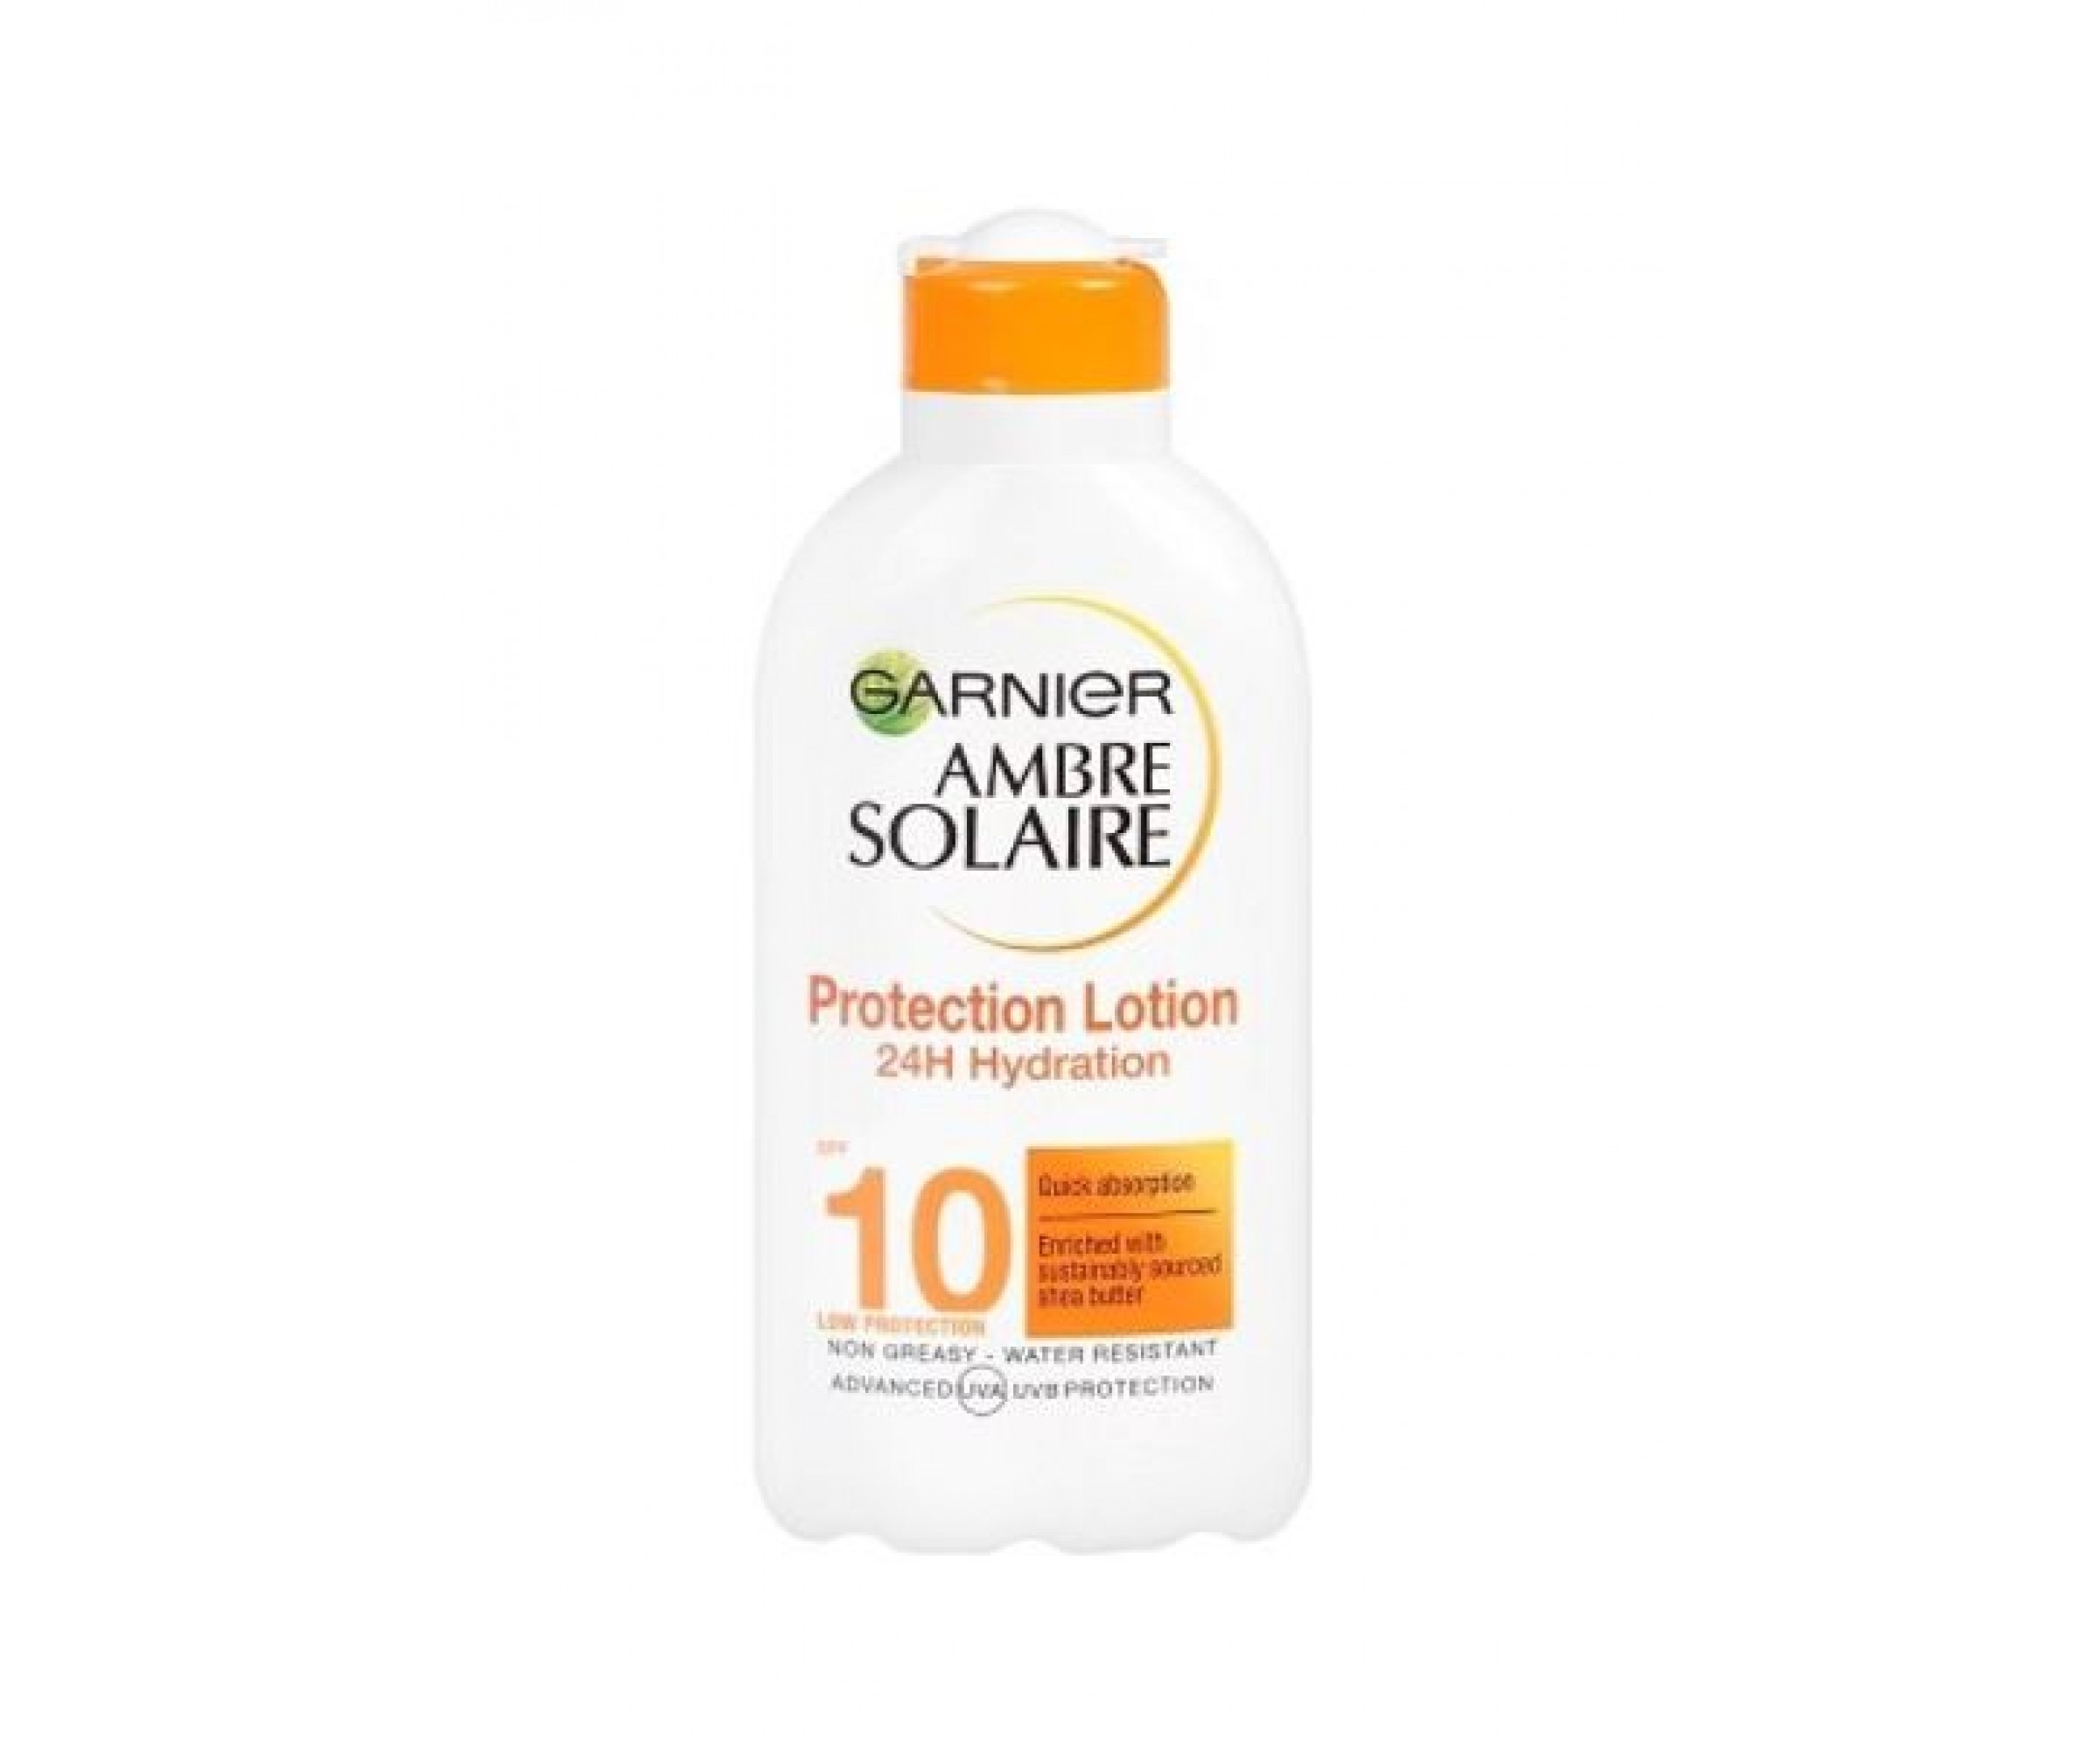 Garnier Ambre Solaire 24 Hydration Protection Lotion